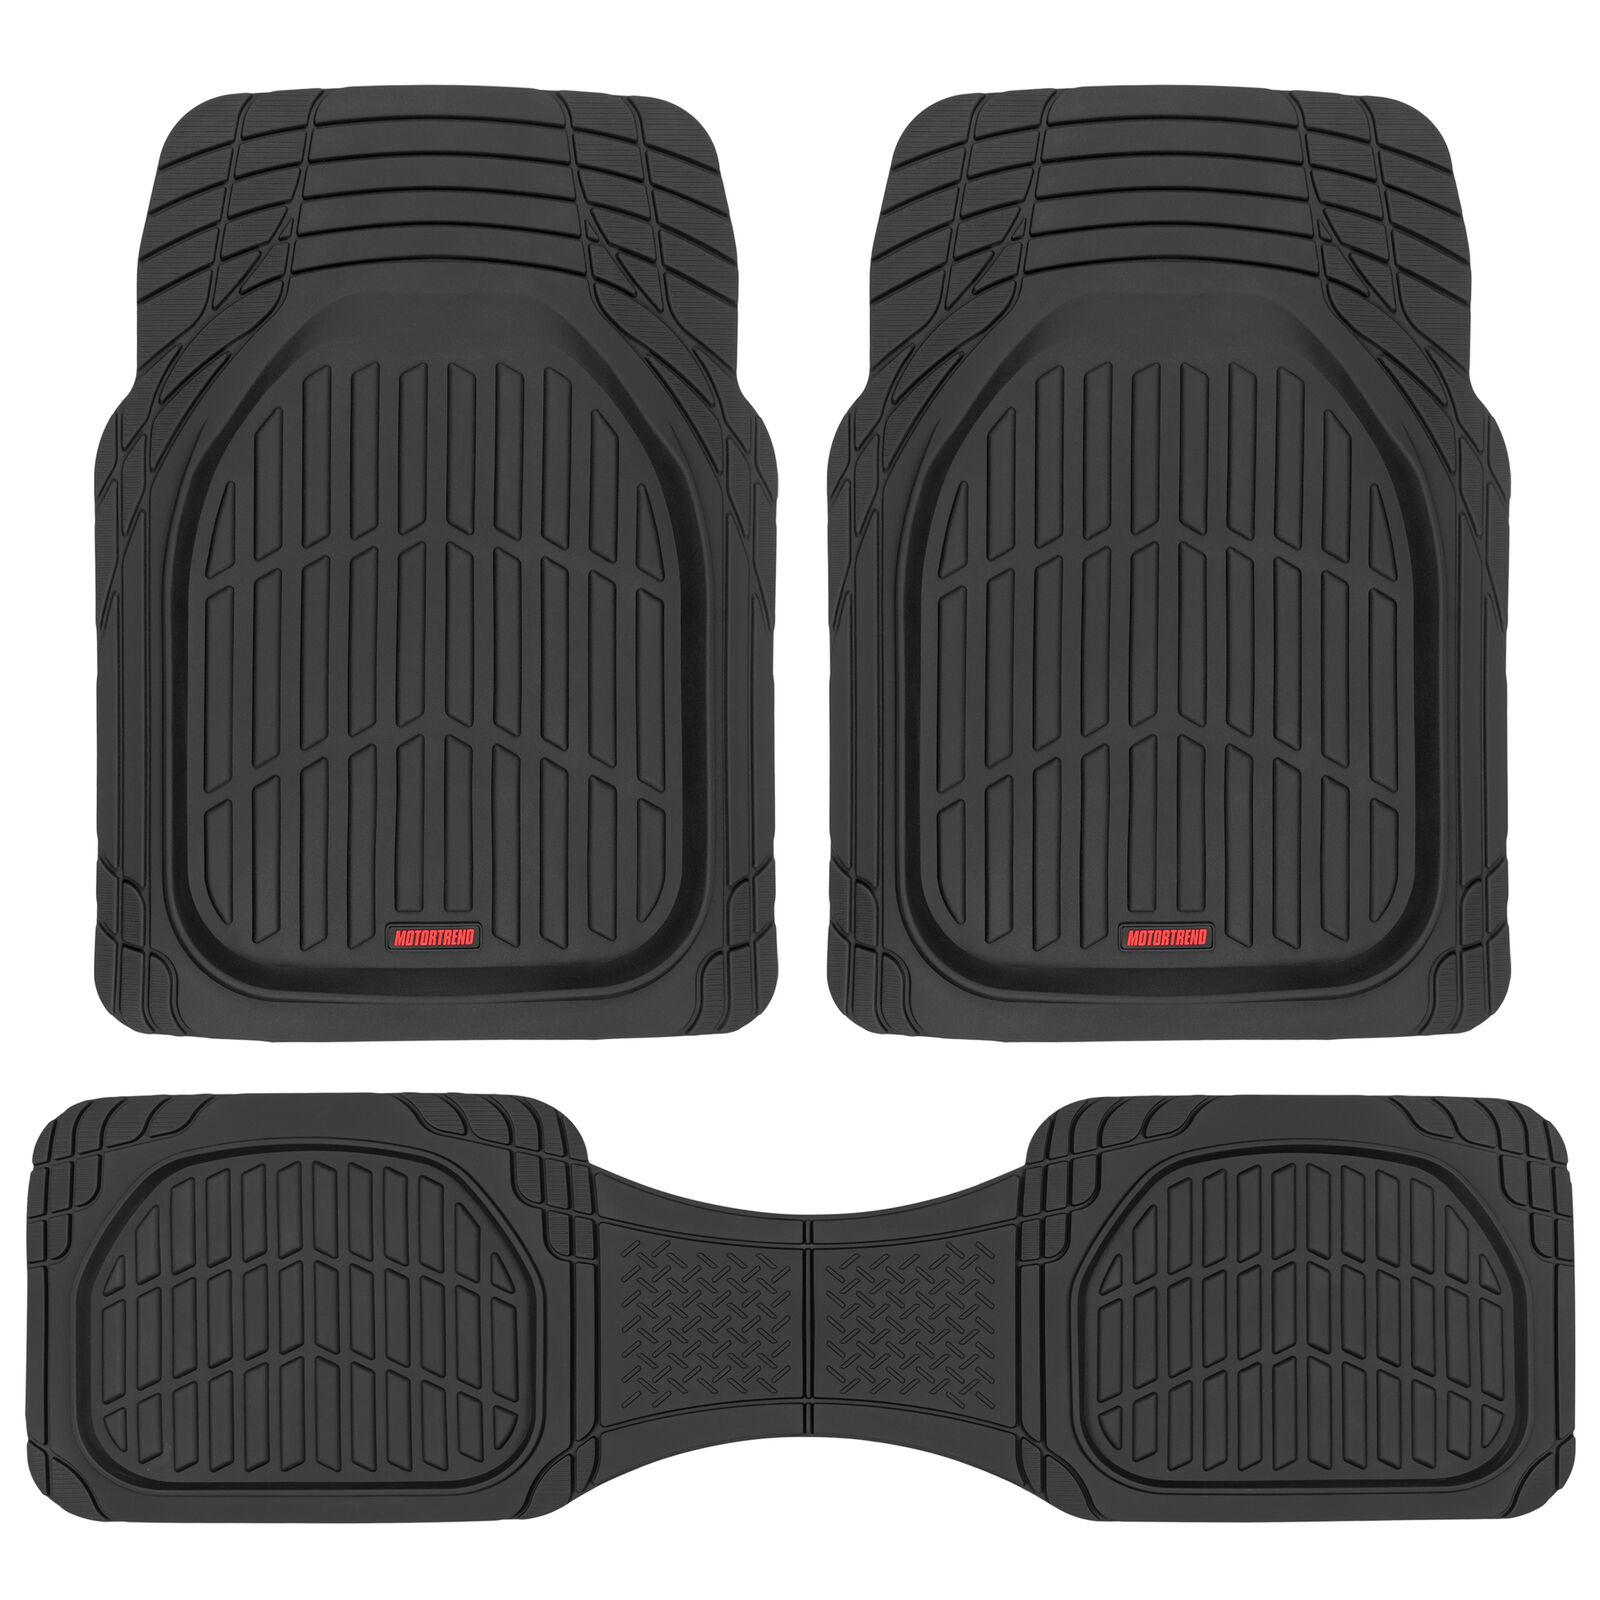 Motor Trend FlexTough 3pc Rubber Car Floor Mats - Thick Heavy Duty All Weather